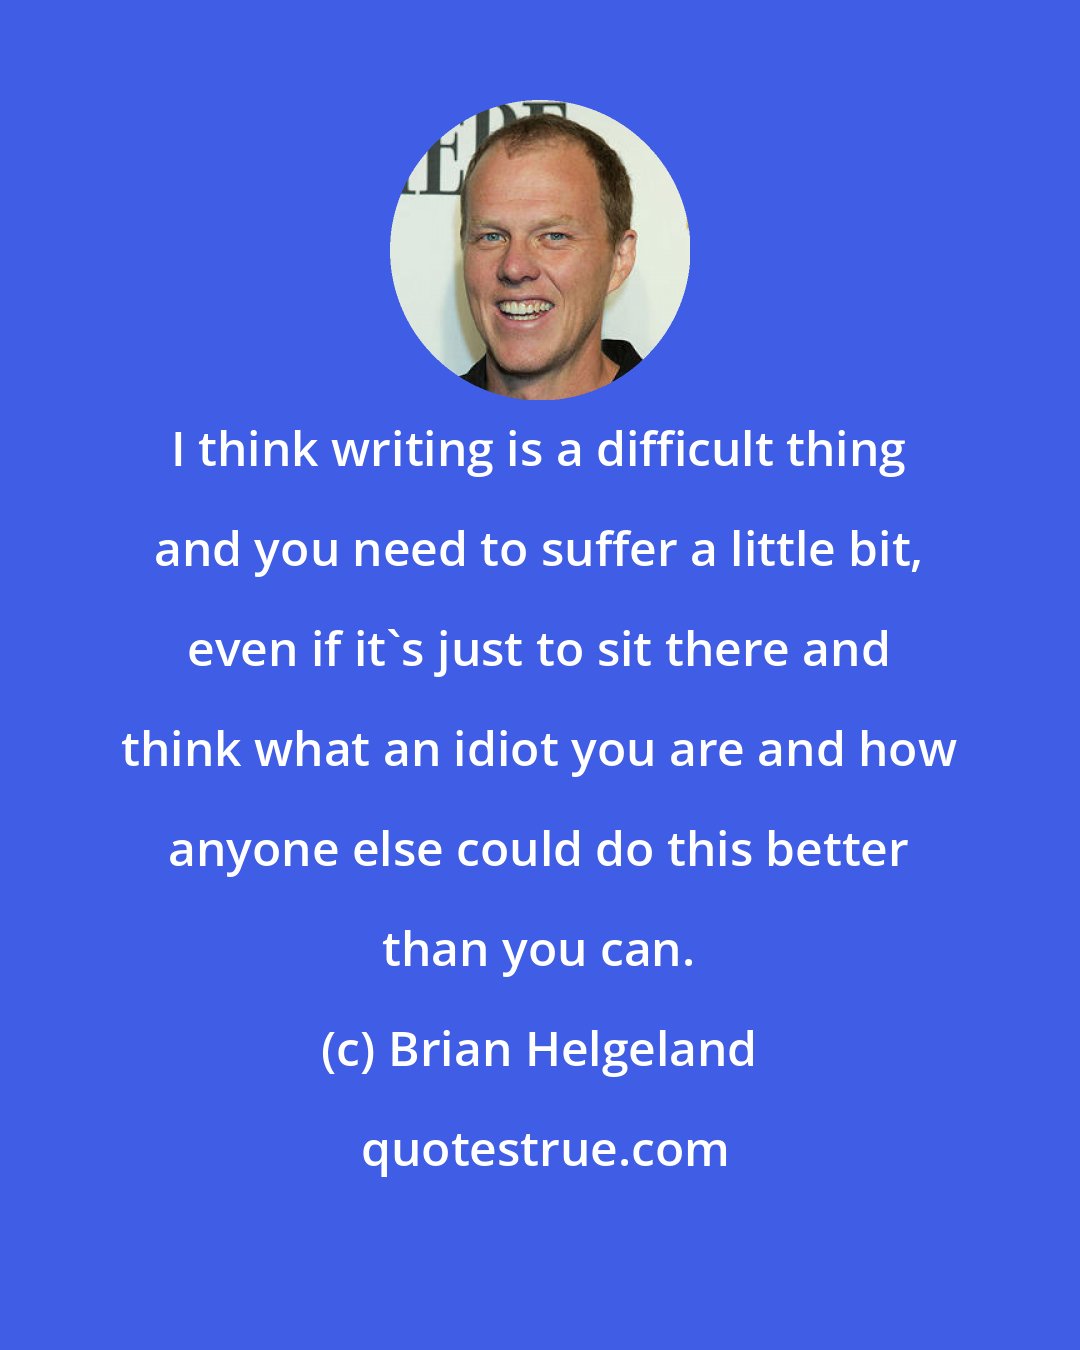 Brian Helgeland: I think writing is a difficult thing and you need to suffer a little bit, even if it's just to sit there and think what an idiot you are and how anyone else could do this better than you can.